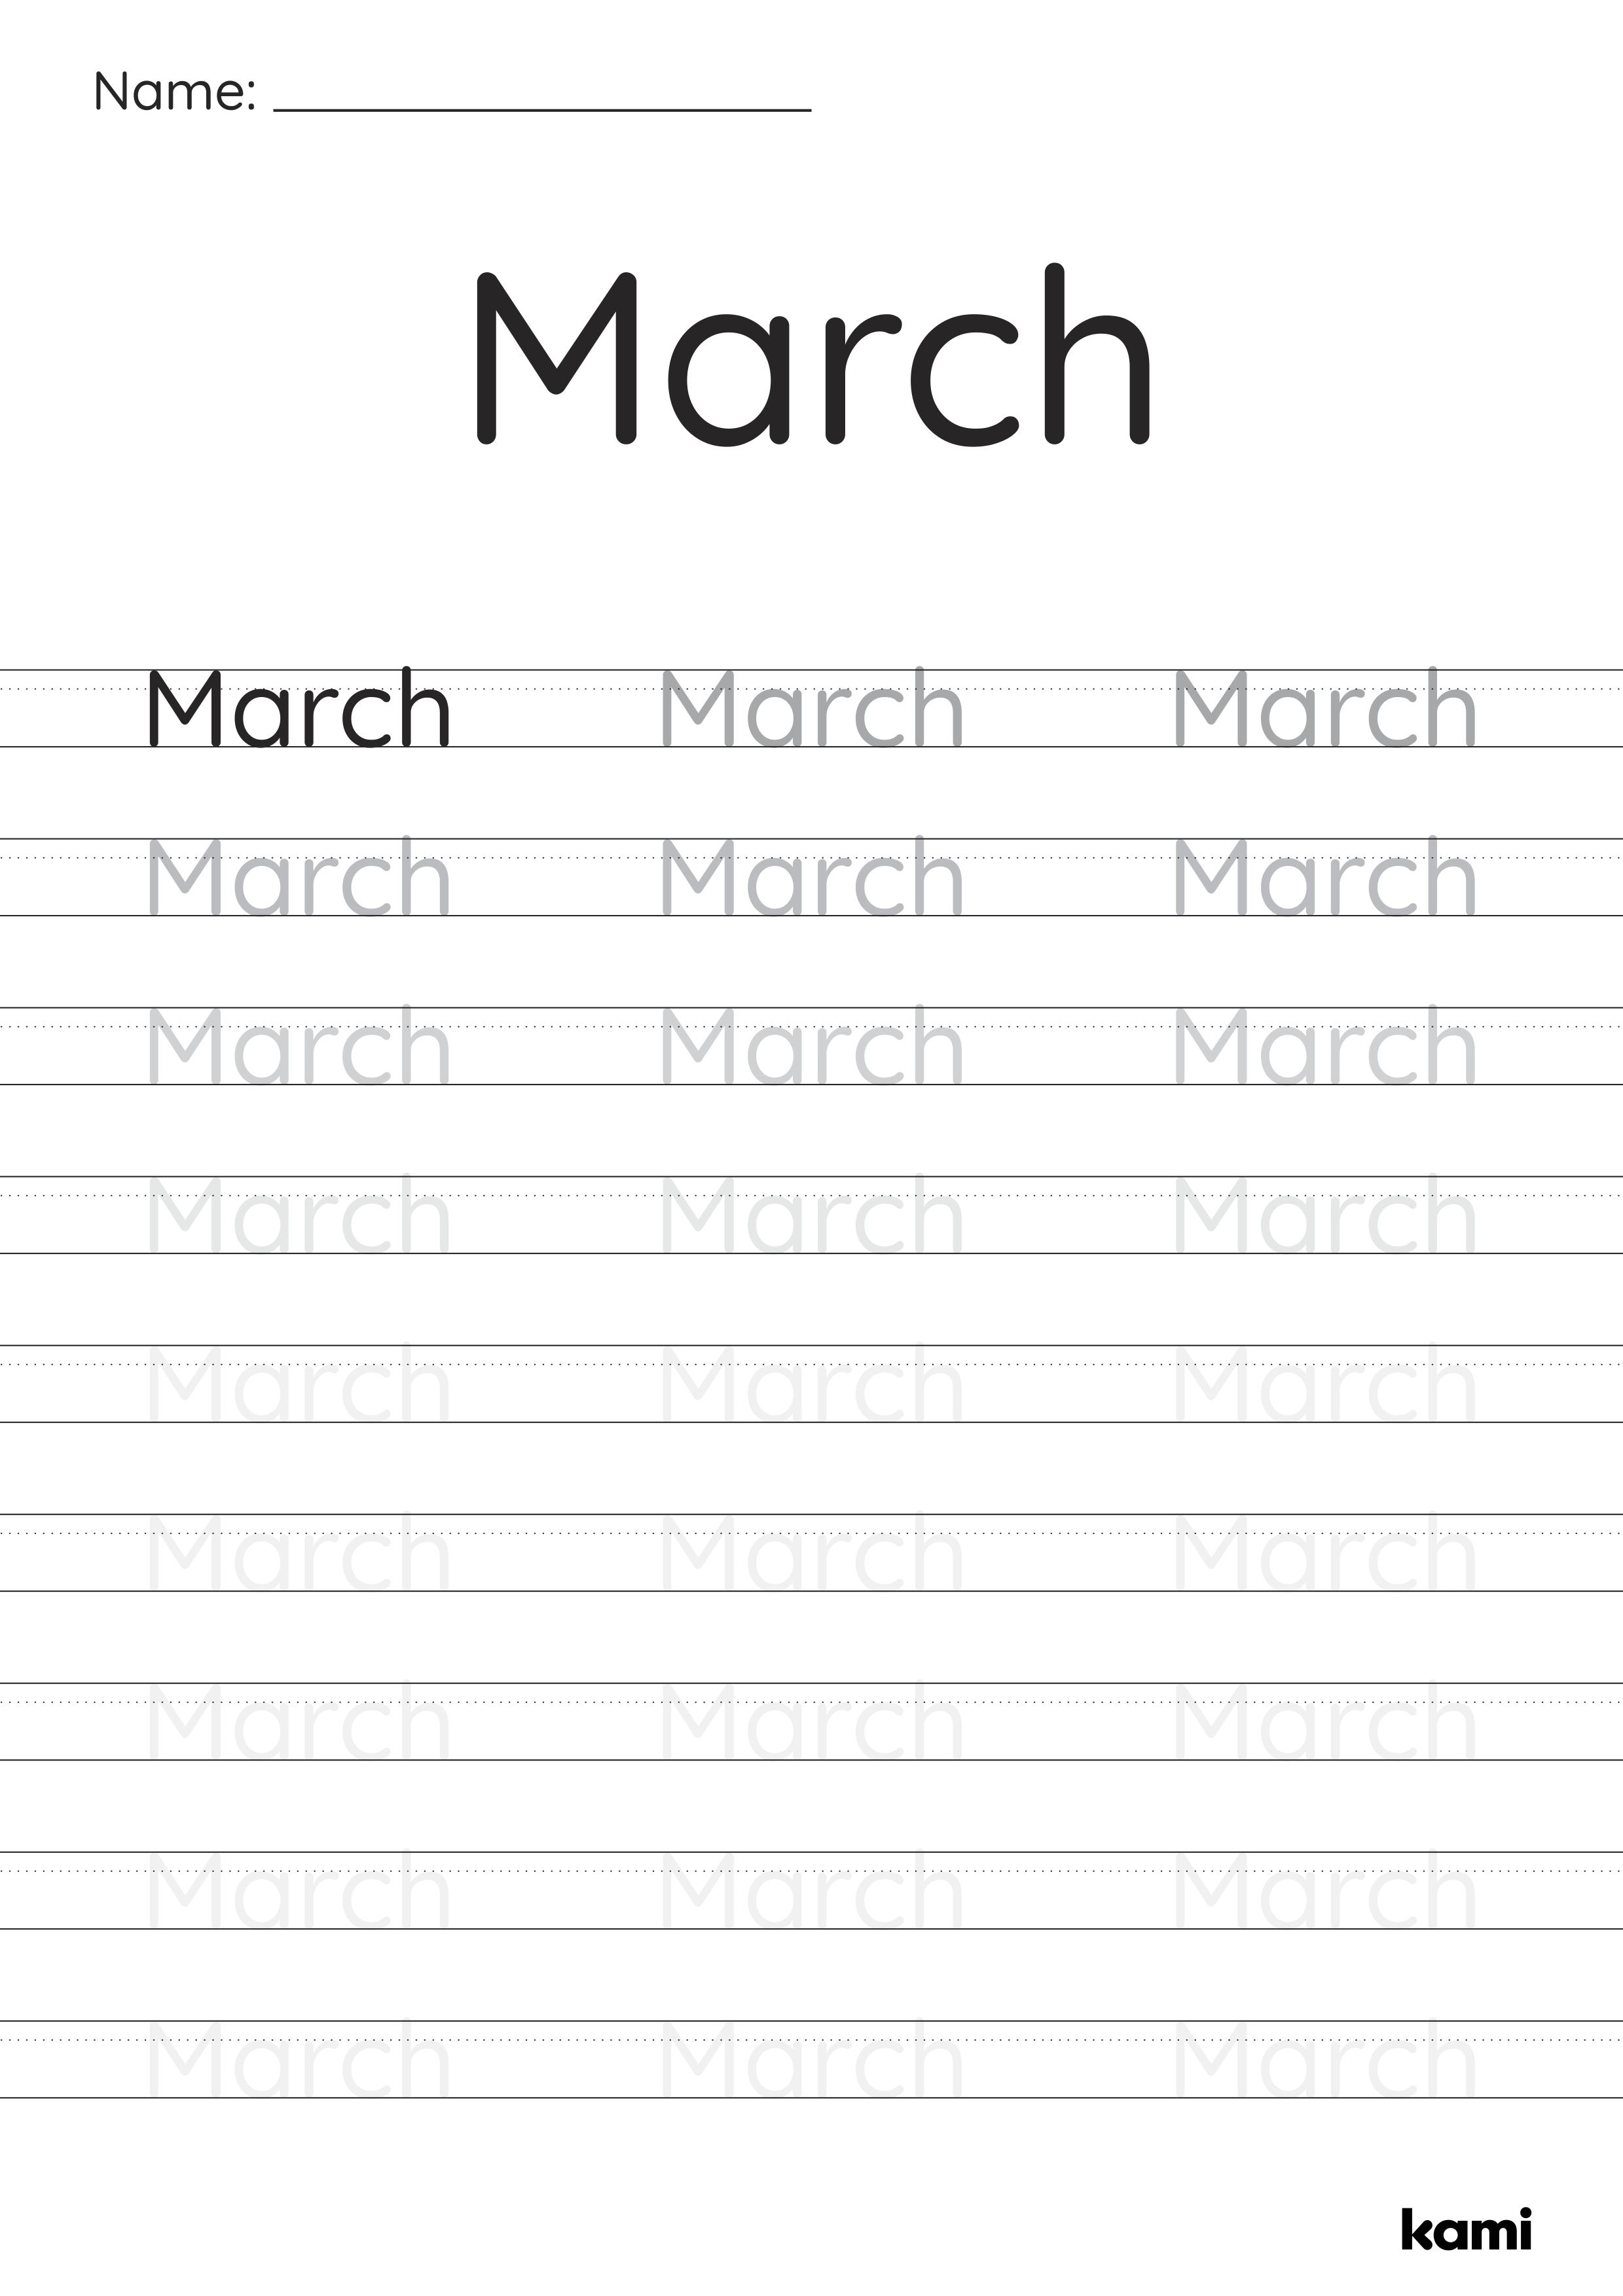 A handwriting worksheet for Pre-K - 1st graders with a March design